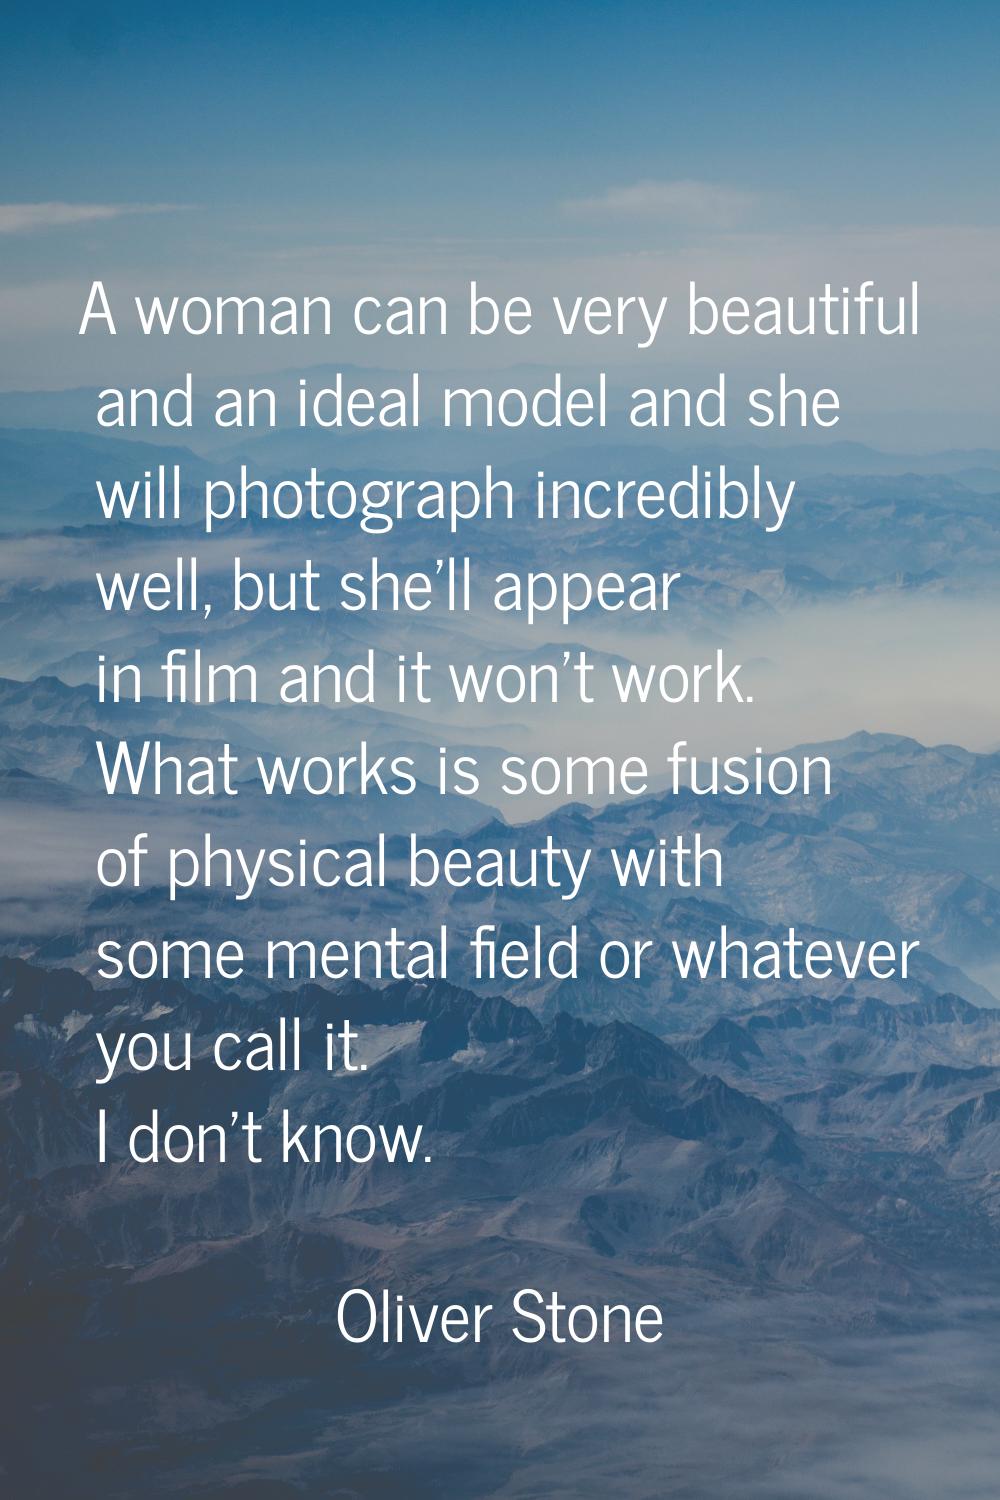 A woman can be very beautiful and an ideal model and she will photograph incredibly well, but she'l